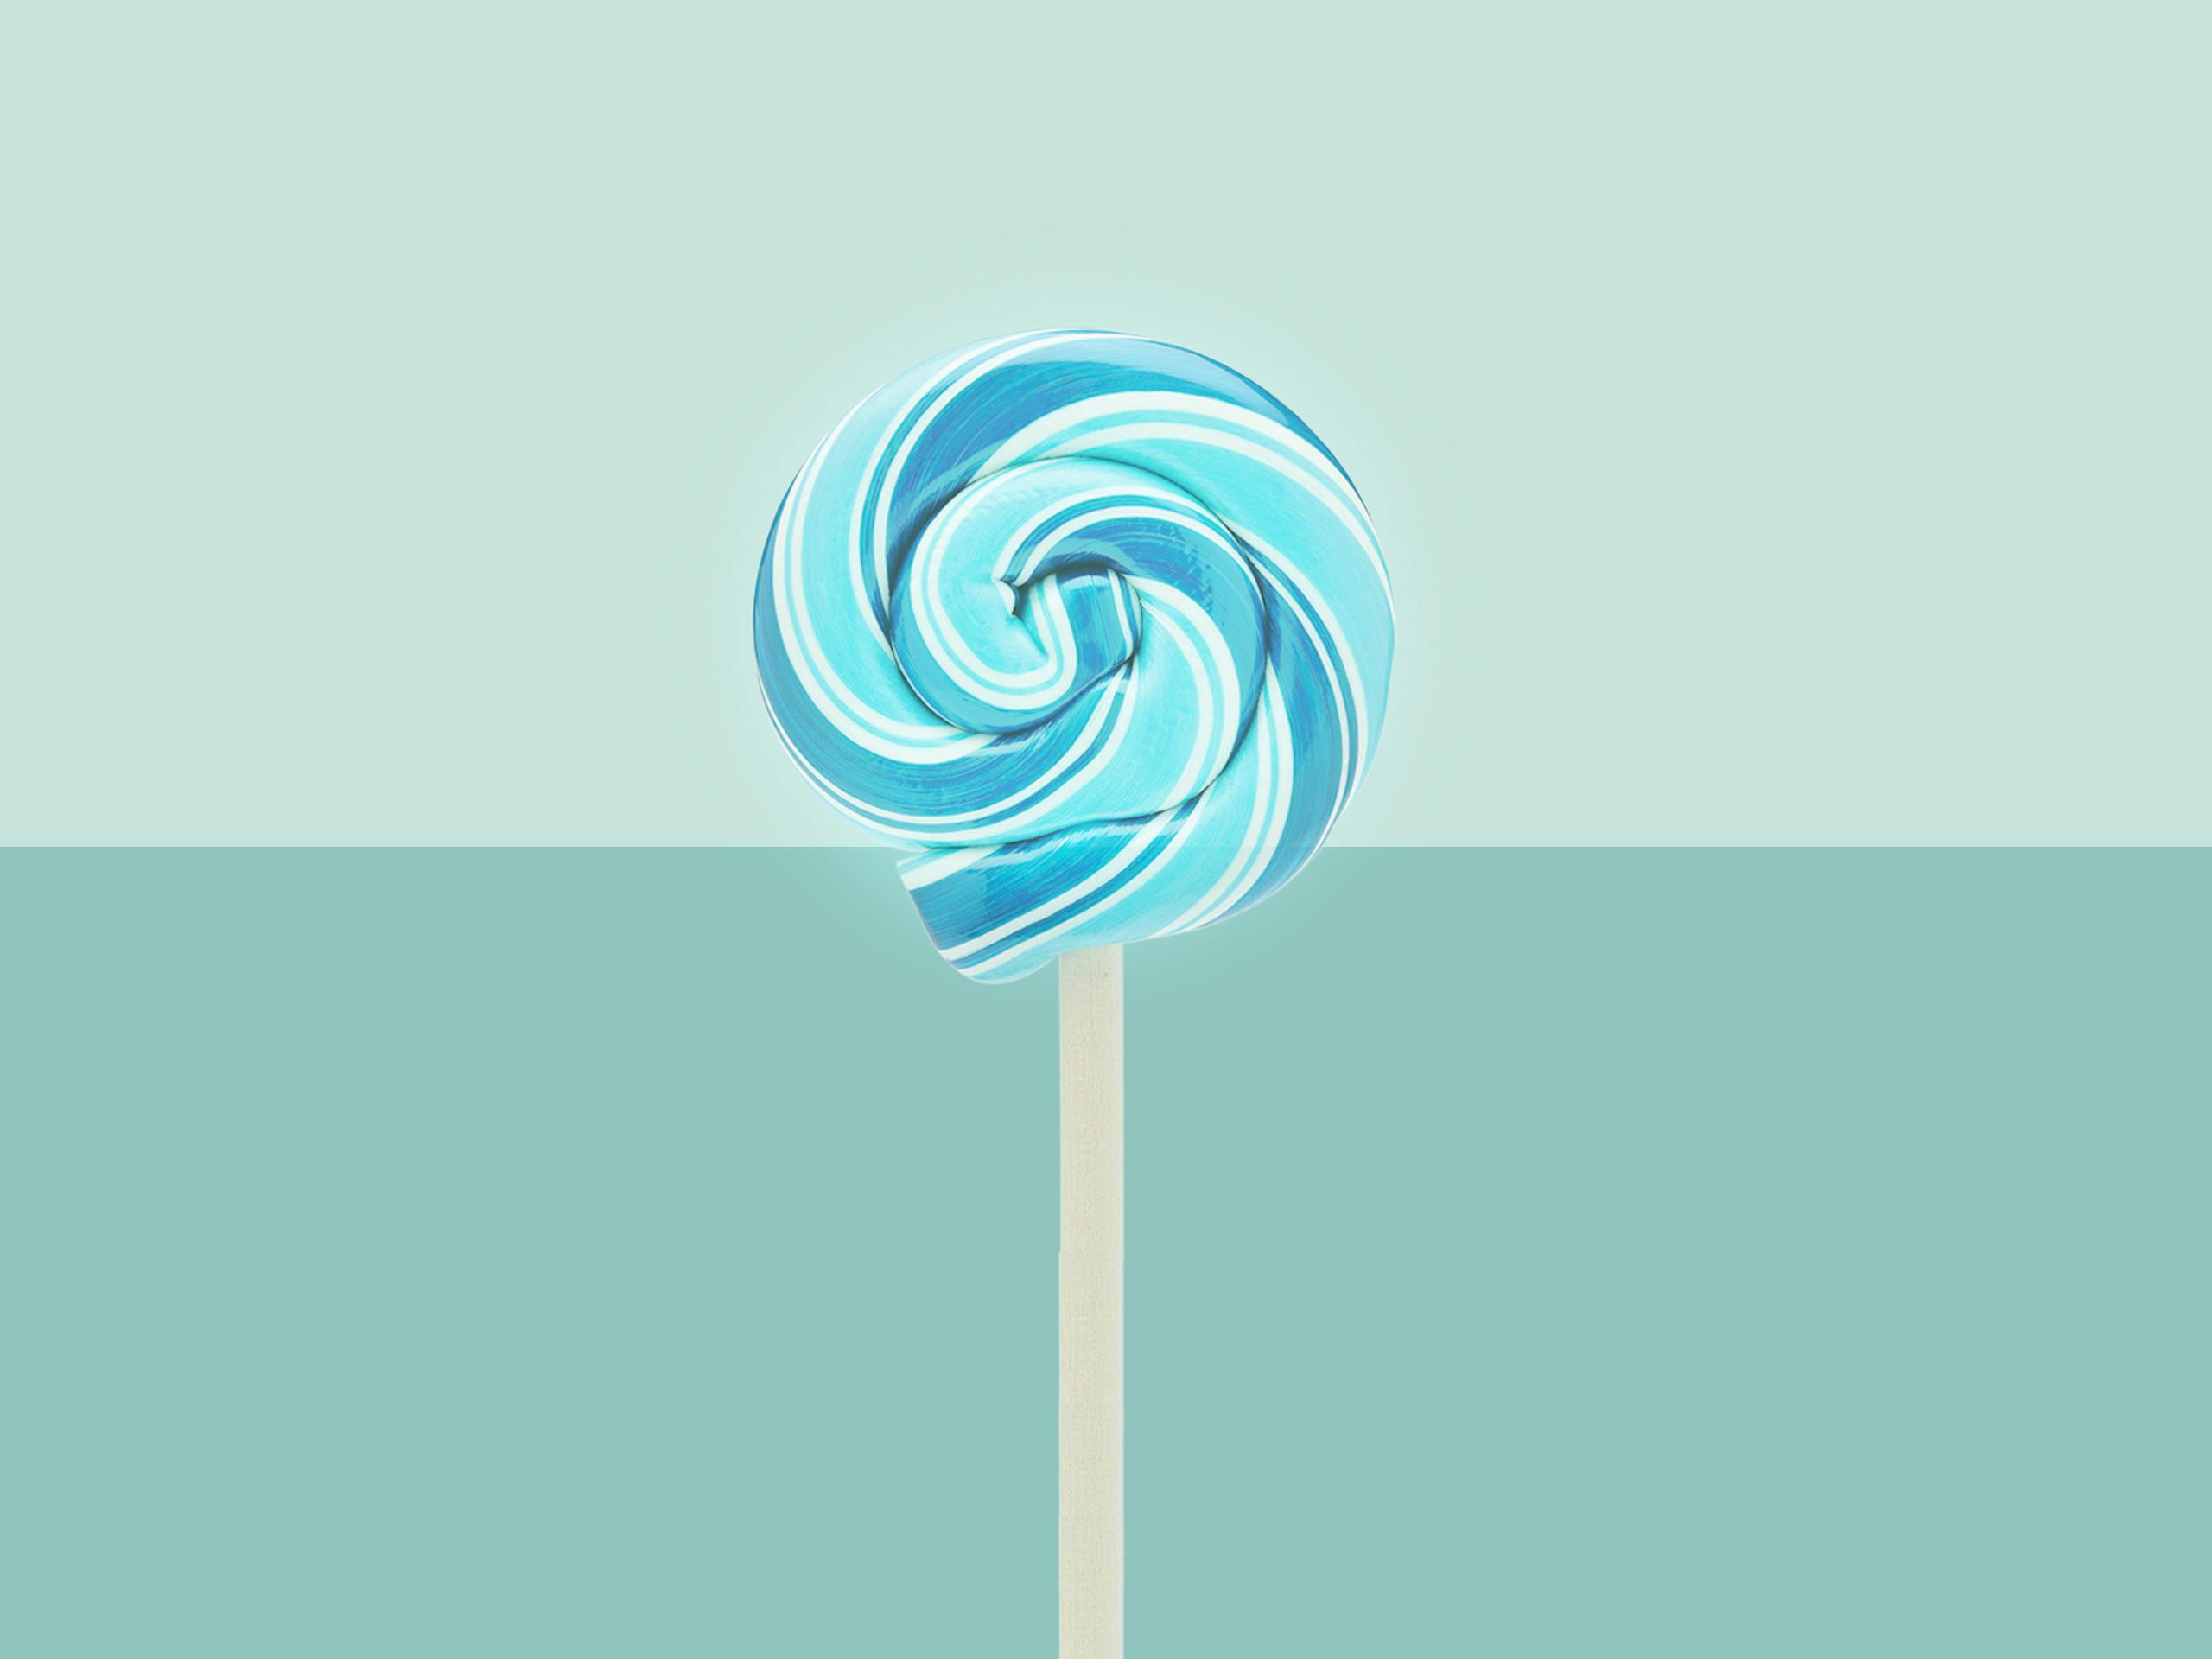 Colorful Lollipop Wallpapers Background Wallpaper Image For Free Download   Pngtree